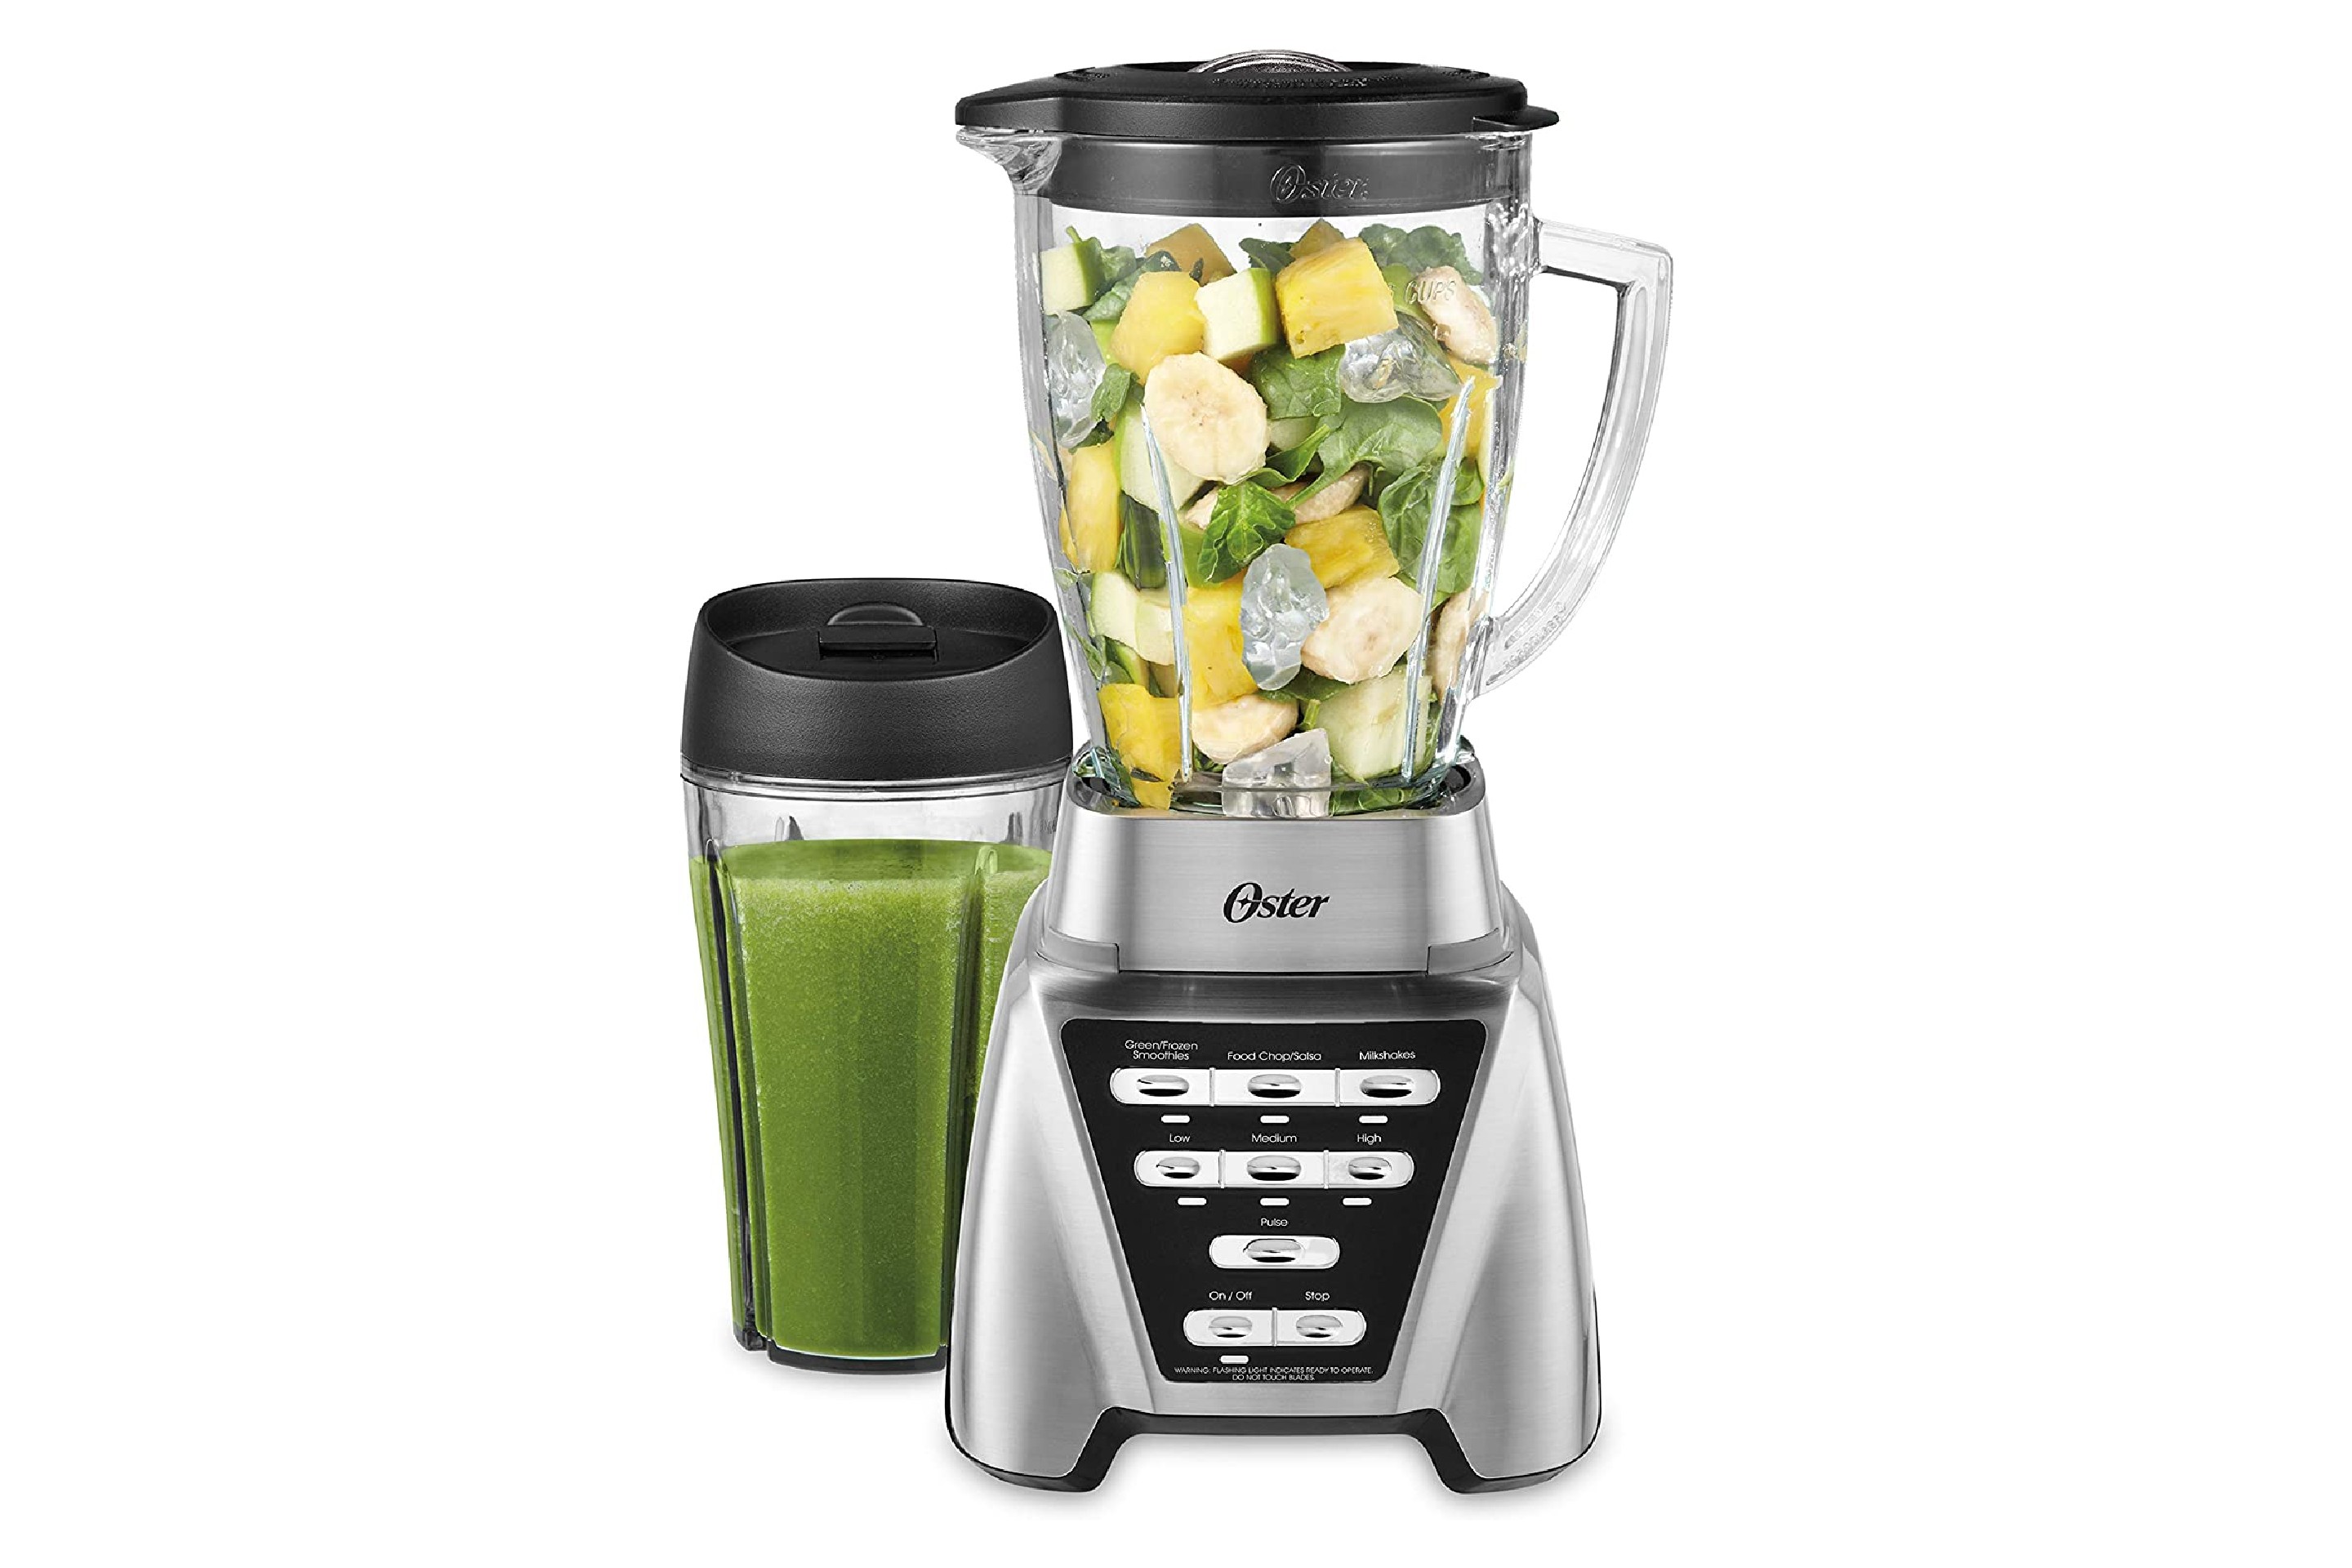 How to choose the best blender